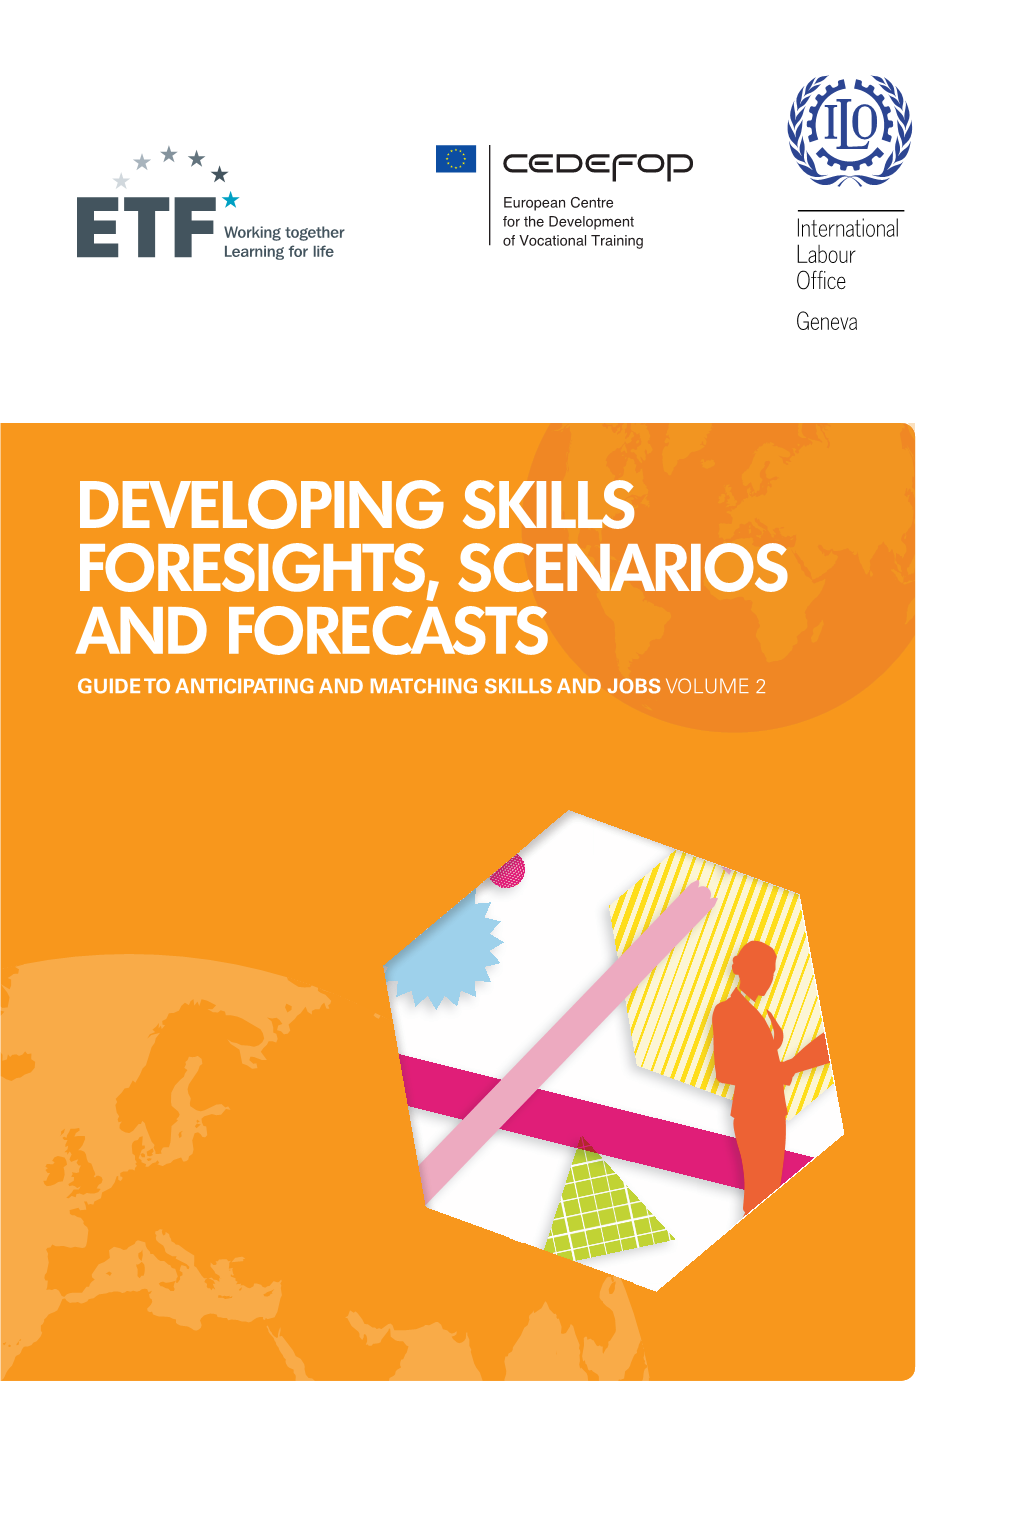 Developing Skills Foresights, Scenarios and Forecasts